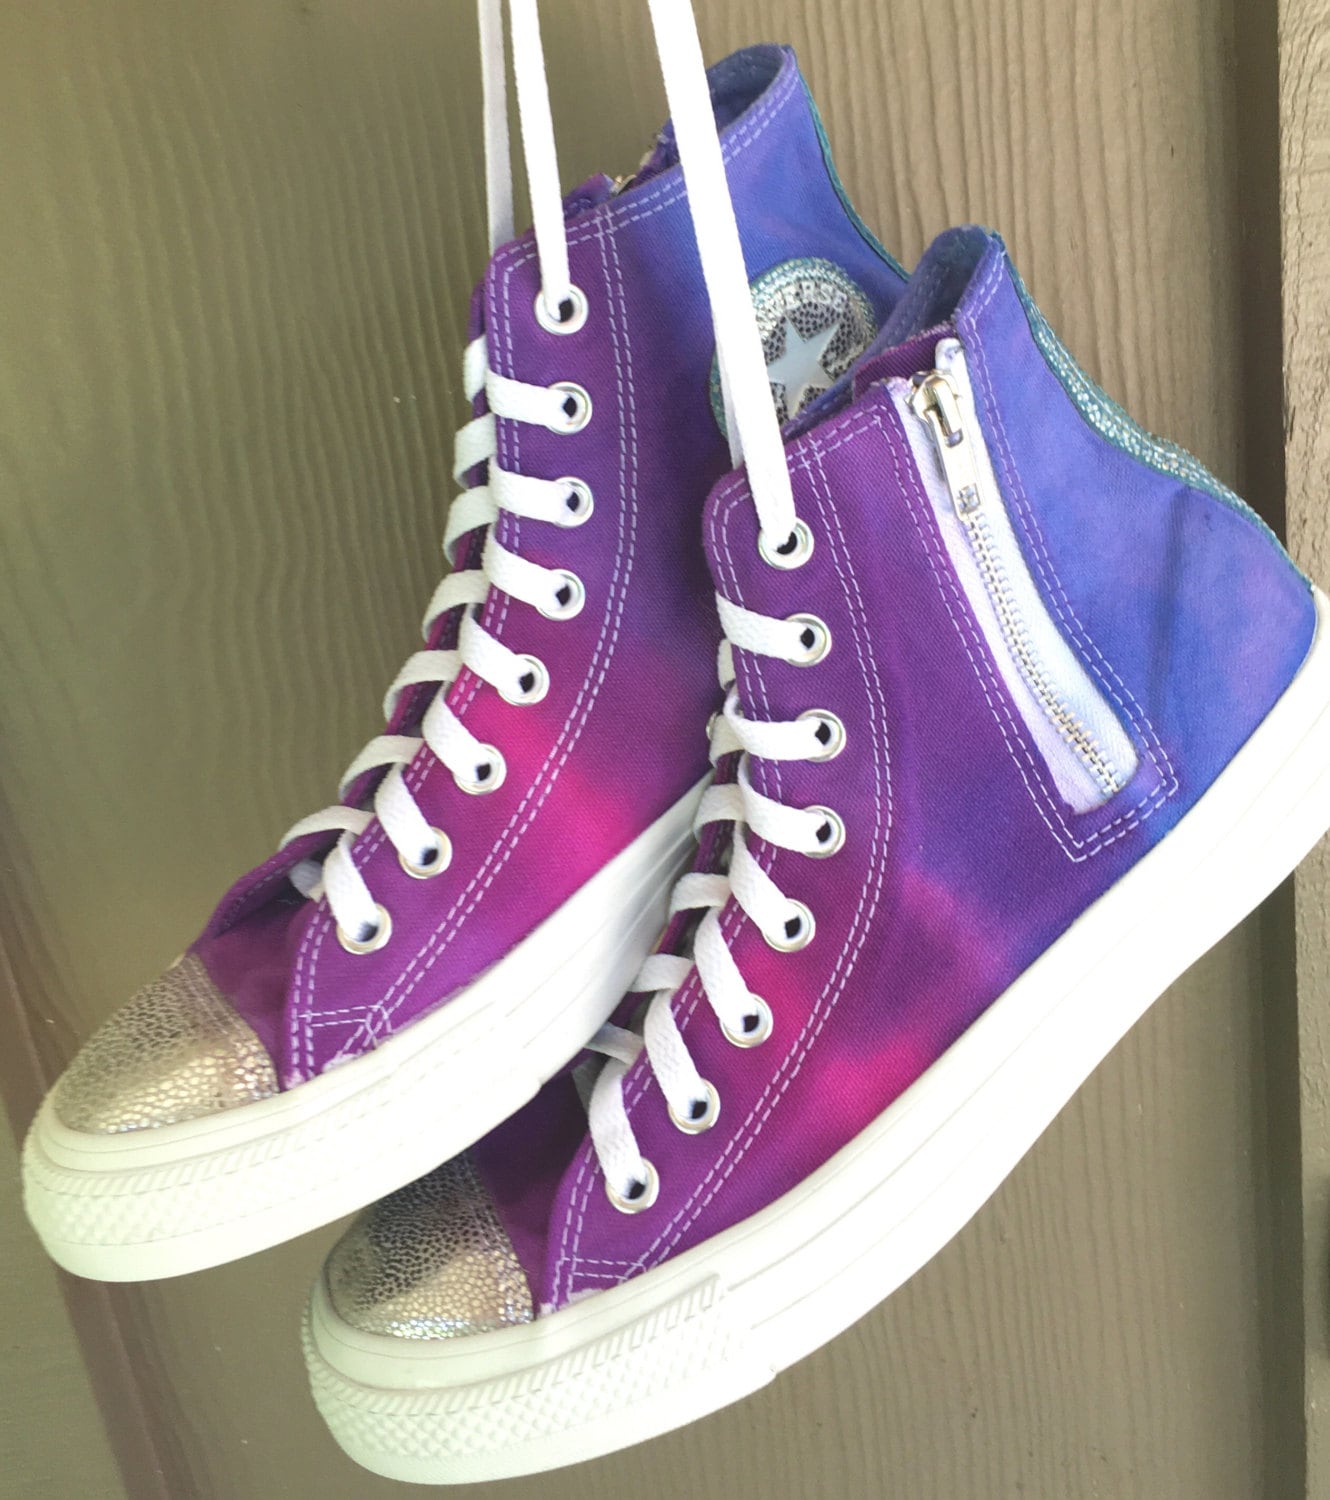 Tow Dyed Converse Women's Sparkly Hi Tops by AllBottledUpTieDyes